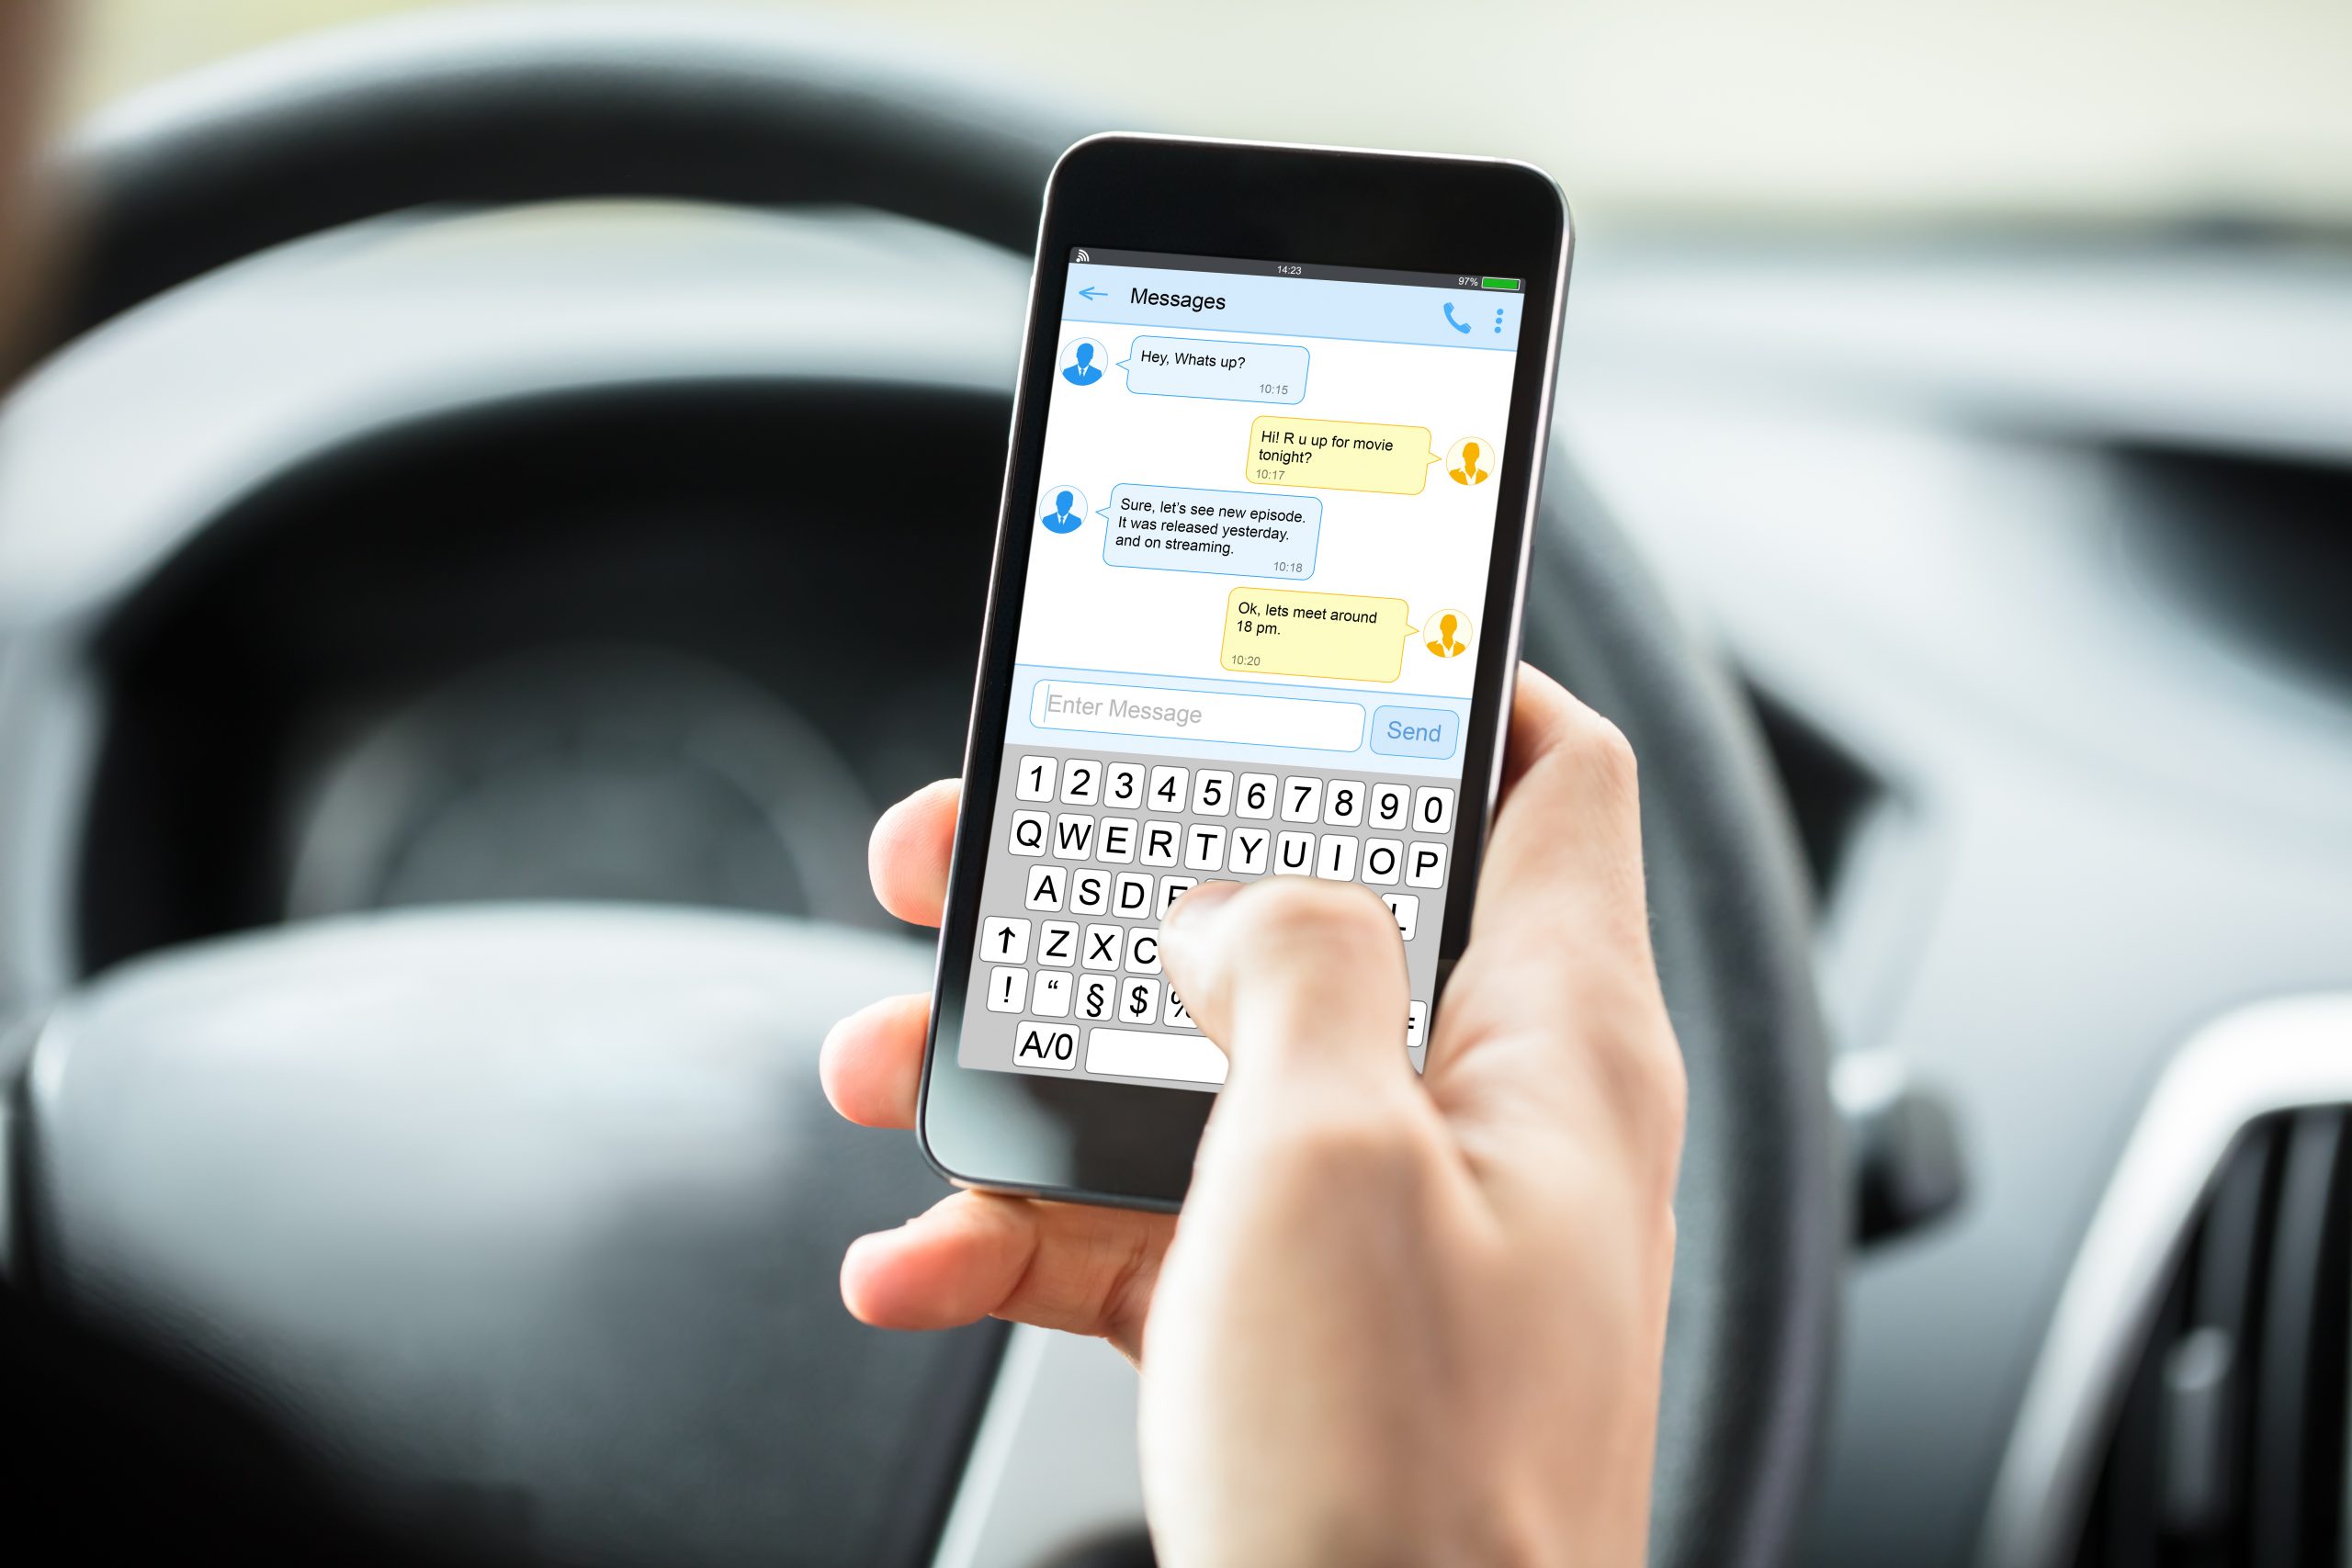 American Academy of Pediatrics: Teen Drivers Often Unsafe on the Road with Speeding and Handheld Cellphone Use